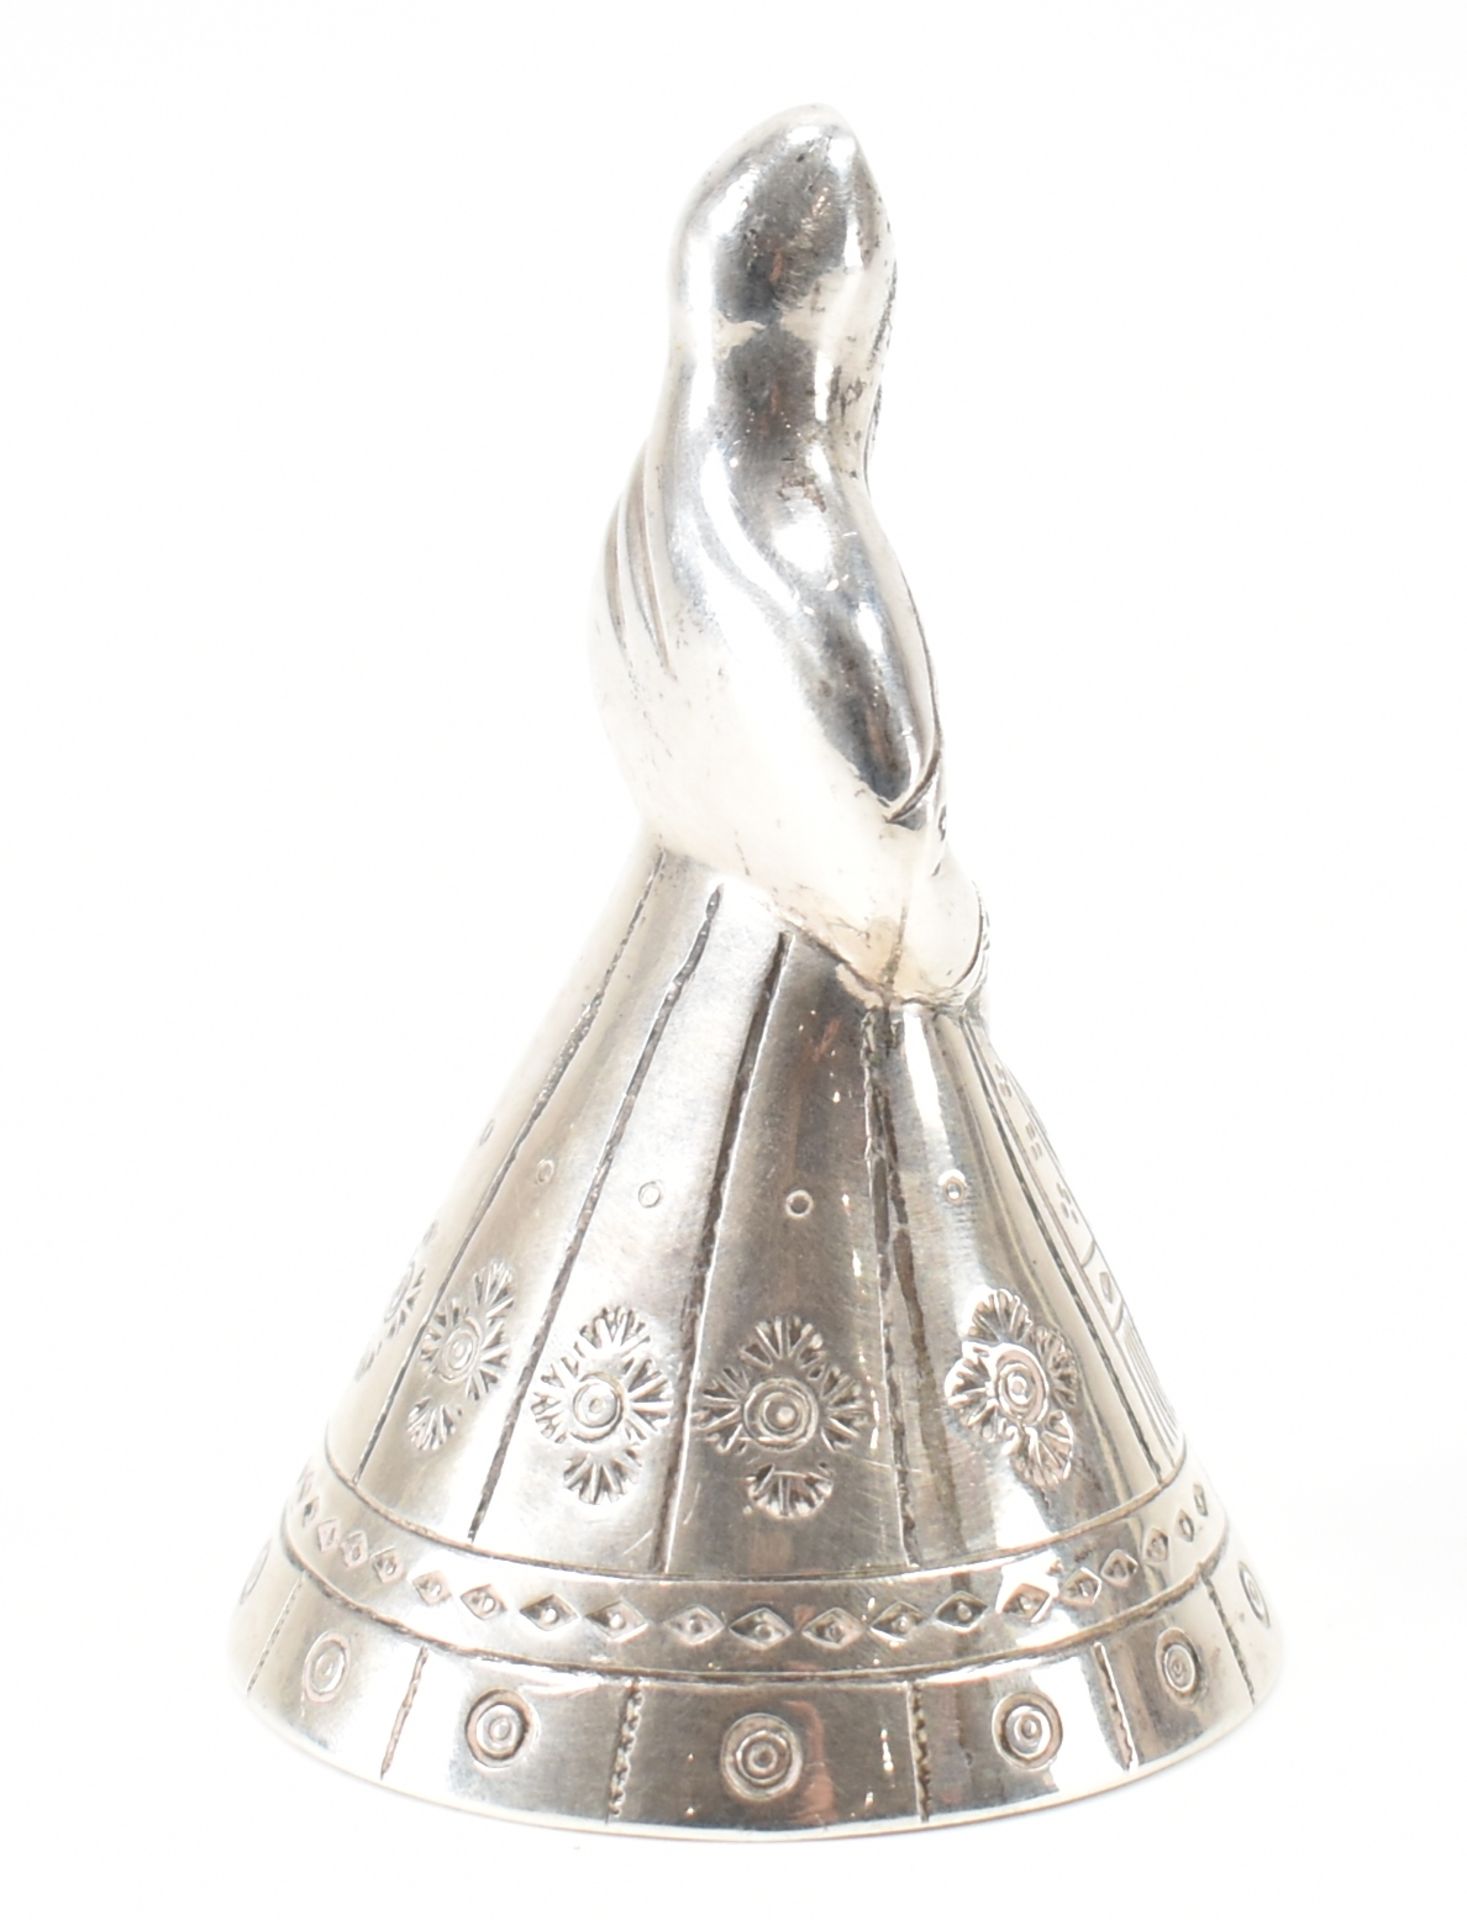 SILVER EASTERN EUROPEAN TABLE BELL - Image 2 of 5